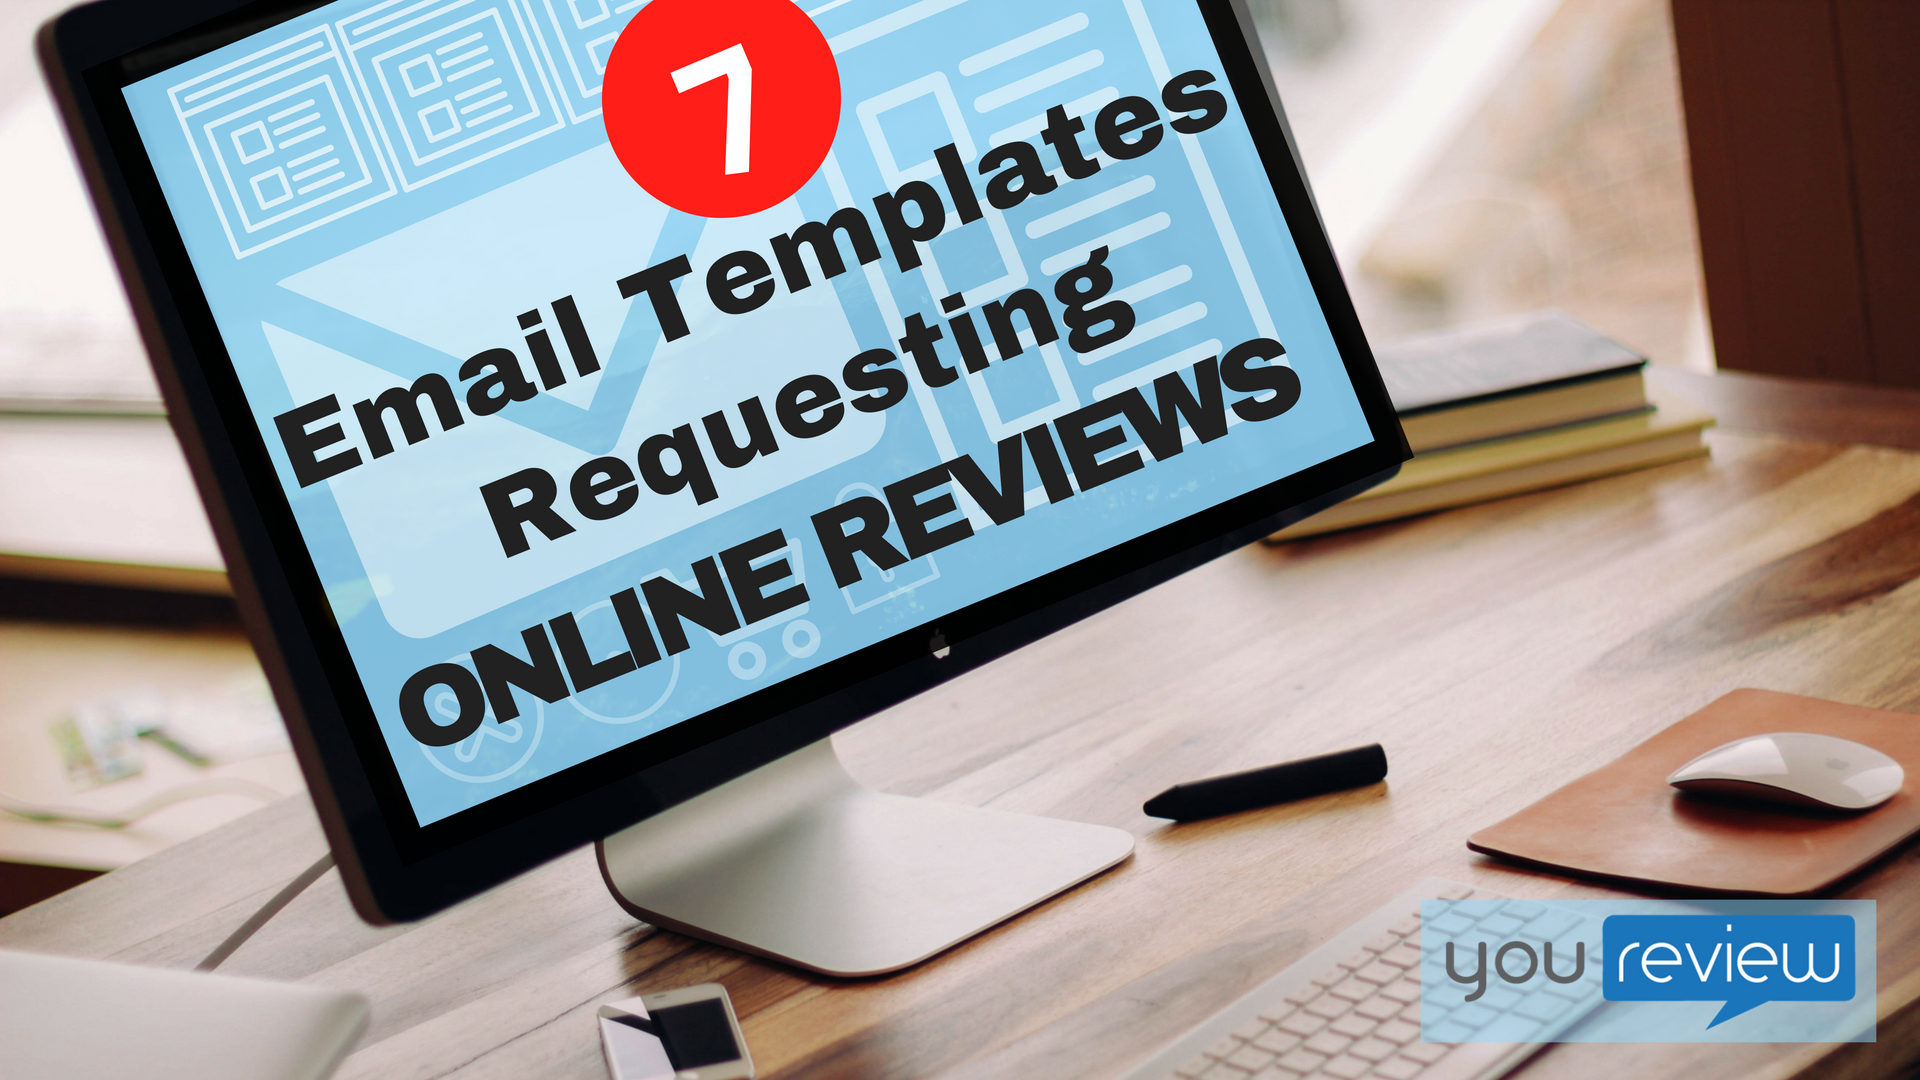 Email Templates Requesting Online Review